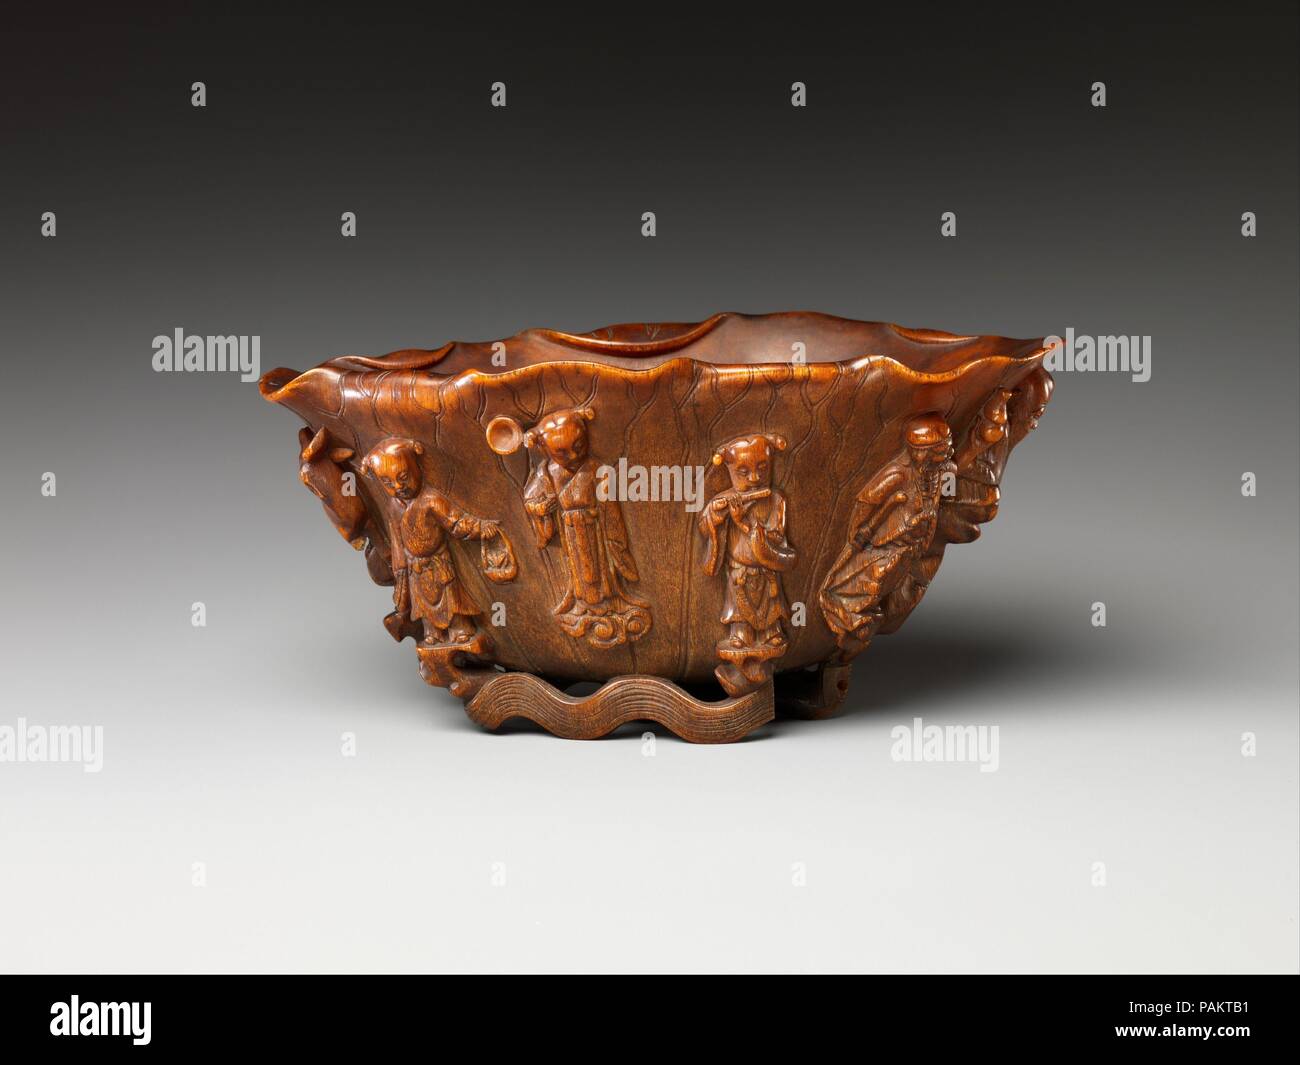 Cup with Eight Daoist Immortals. Culture: China. Dimensions: H. 3 1/8 in. (7.9 cm); W. (rim) 6 1/4 in. (15.9 cm); D. 3 1/2 in. (8.9 cm). Date: late 18th-19th century.  By the early thirteenth century a historical group of eight figures--six male, one female, and one hermaphrodite--had become symbolic of the attainment of immortality, one of the primary goals of Daoism. Each figure is a patron of a specific group and is identifiable by the object that he (or she) holds. For example, Lan Caihe, patron of gardeners and florists, carries a basket; He Xiangu, patron of housewives, holds a lotus; an Stock Photo